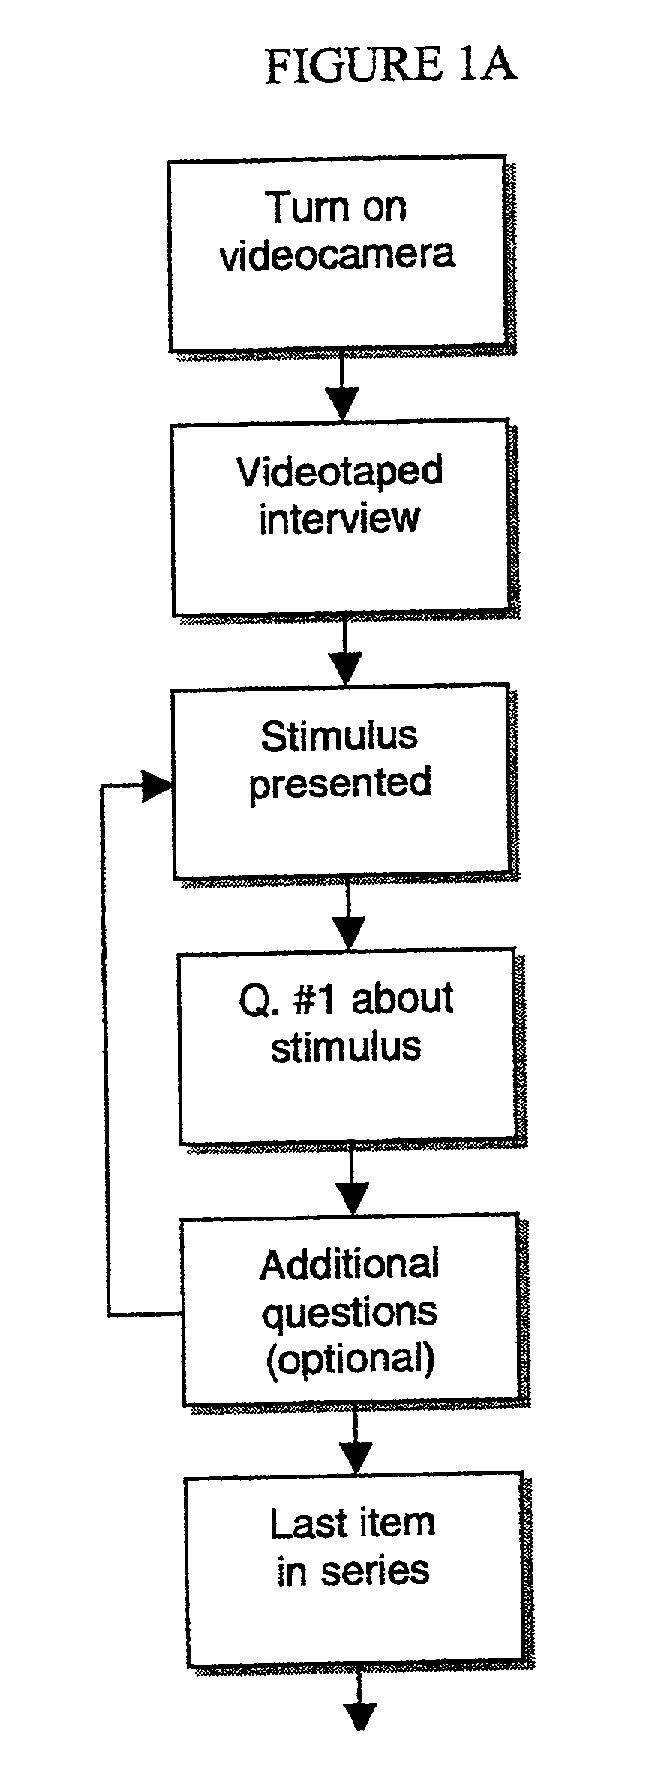 Method of facial coding monitoring for the purpose of gauging the impact and appeal of commercially-related stimuli